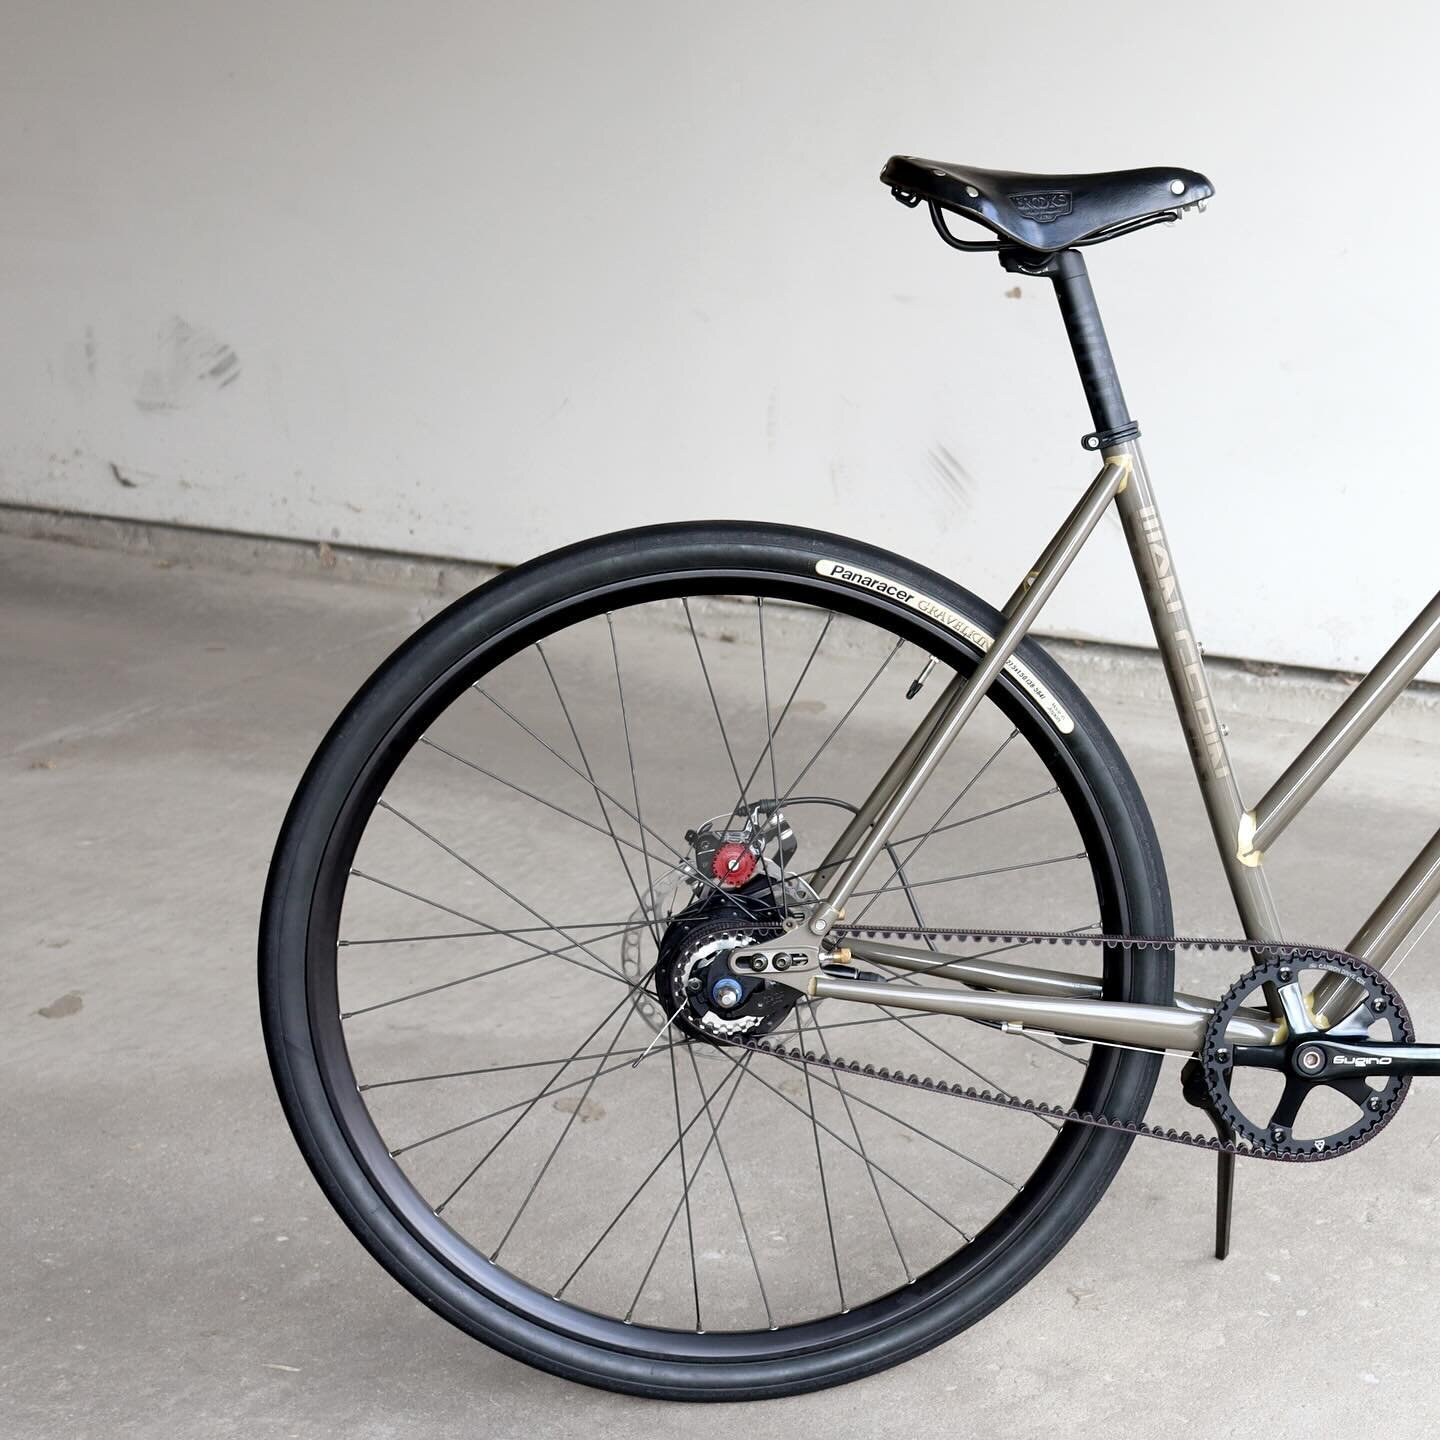 Bike 13 made for @flood6018 is my first step-through frame. The belt drive with internal geared hub minimizes maintenance. The clear powder coat reveals brazed fillets and polished metal elements beneath. The geometry focused on comfort with power. D